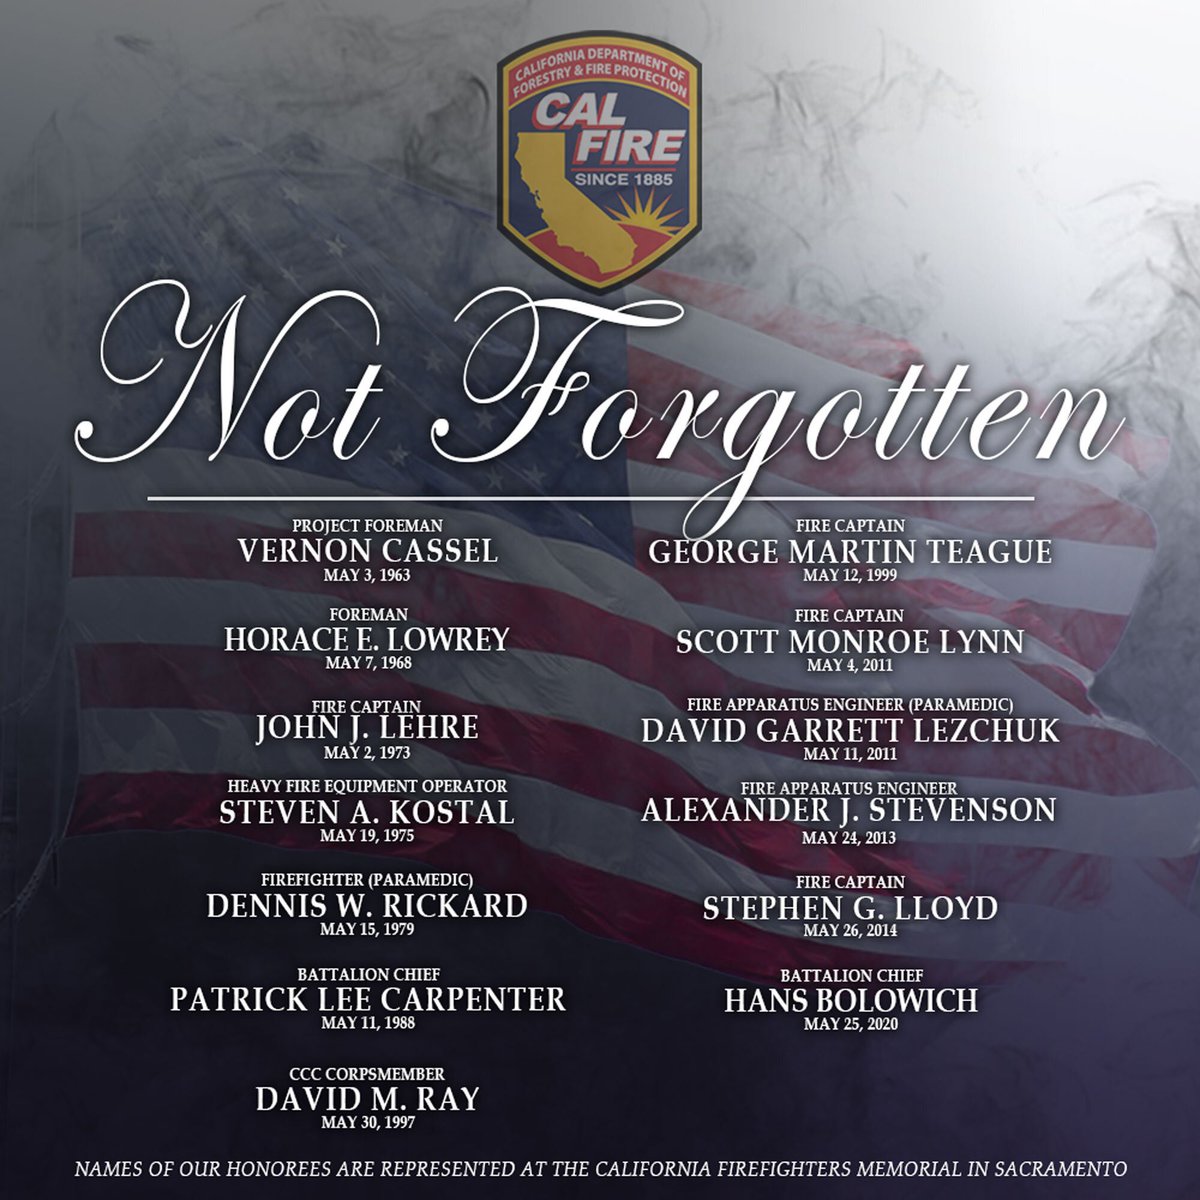 Today, we remember 13 cherished department members lost in the month of May. Their dedication
and courage live on, shaping our firefighting community's spirit and safeguarding our neighborhoods. Their legacy lives on. 
#LODD #NotForgotten #FirefightingHeroes